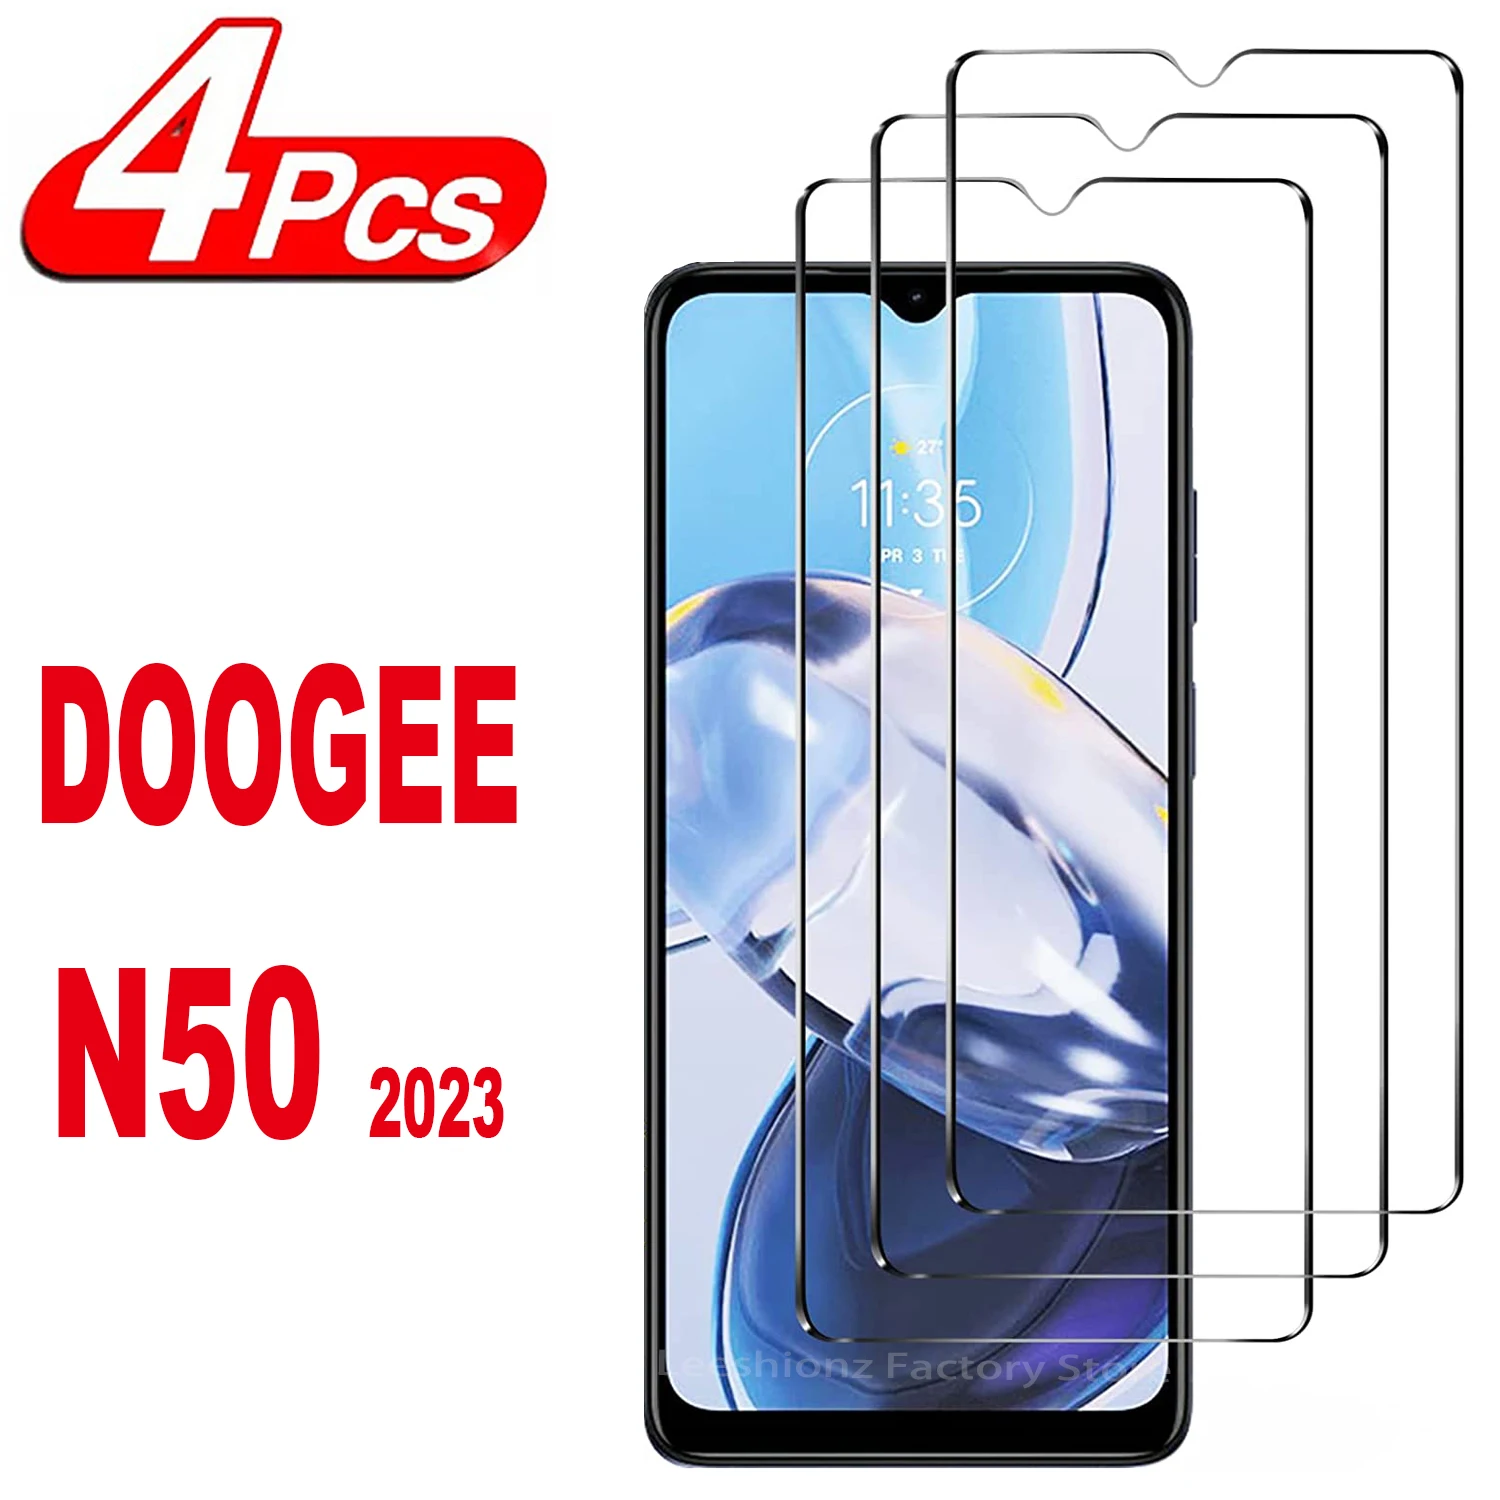 

2/4Pcs Tempered Glass For DOOGEE N50 2023 Screen Protector Glass Film